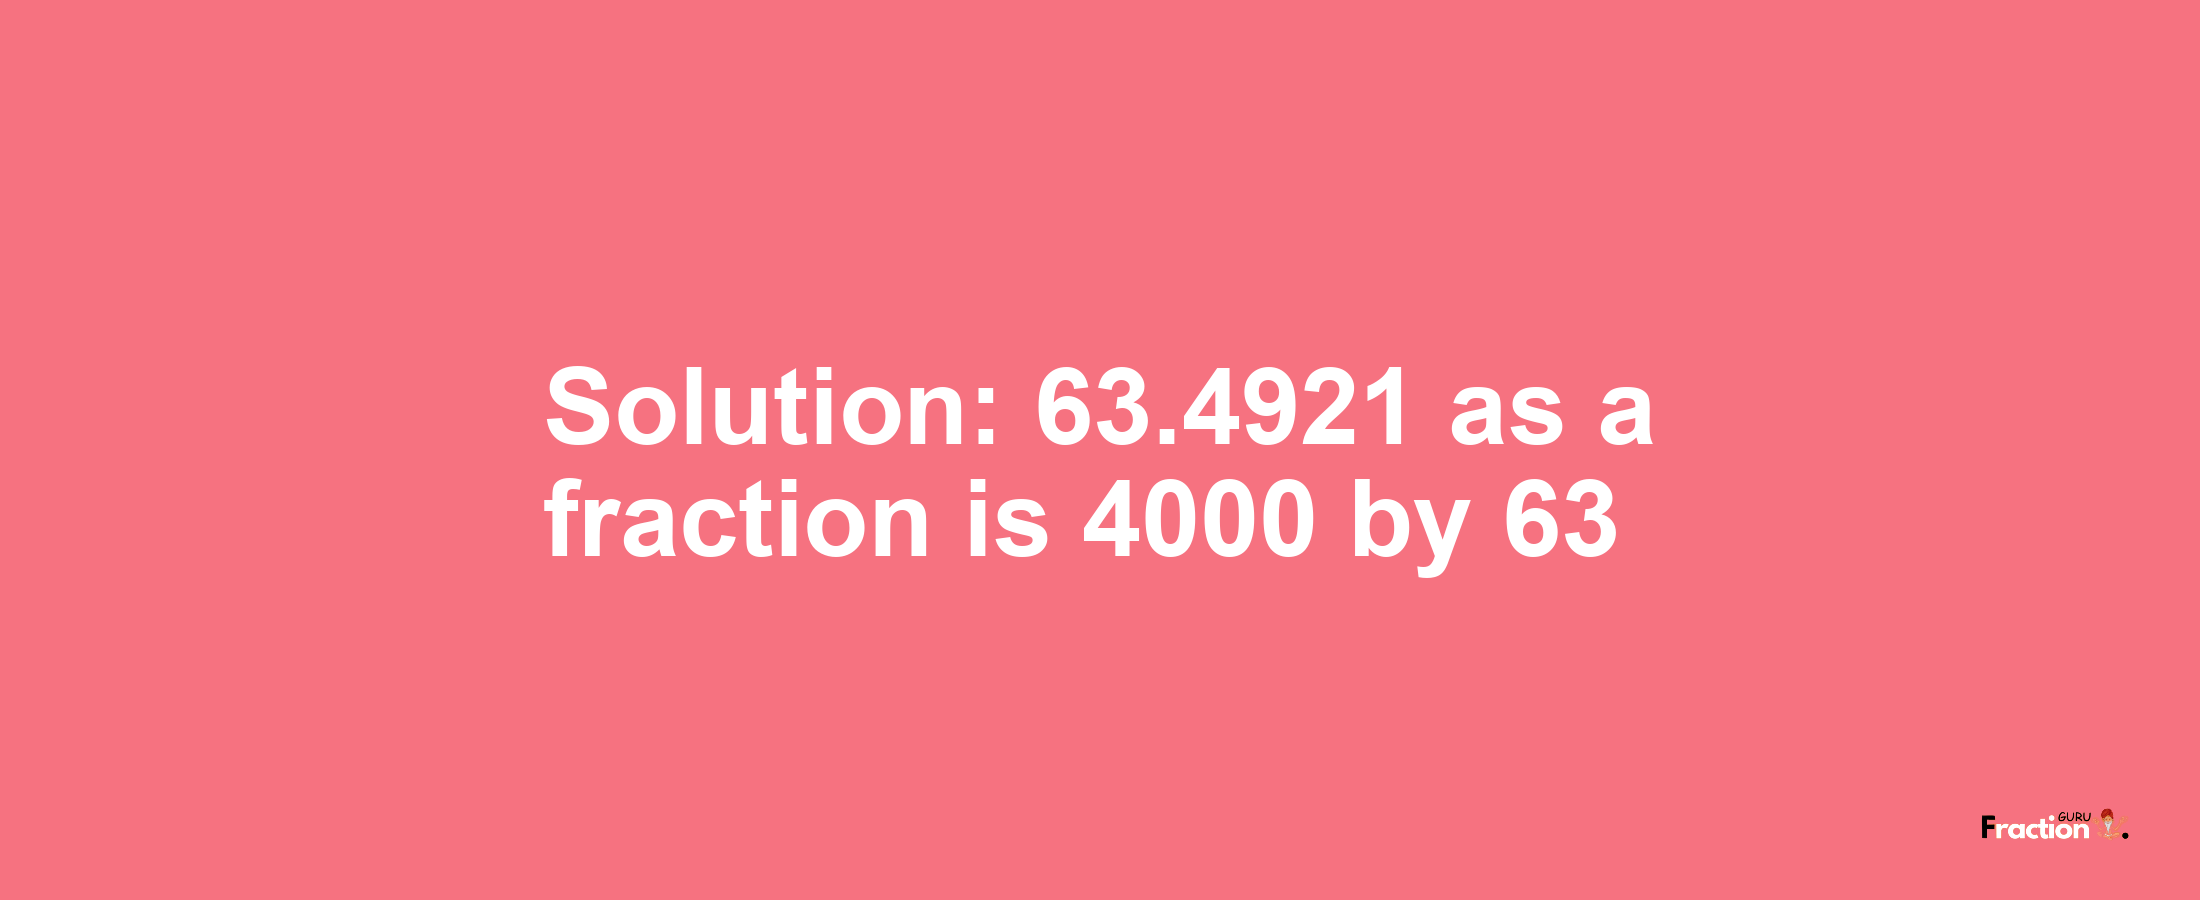 Solution:63.4921 as a fraction is 4000/63